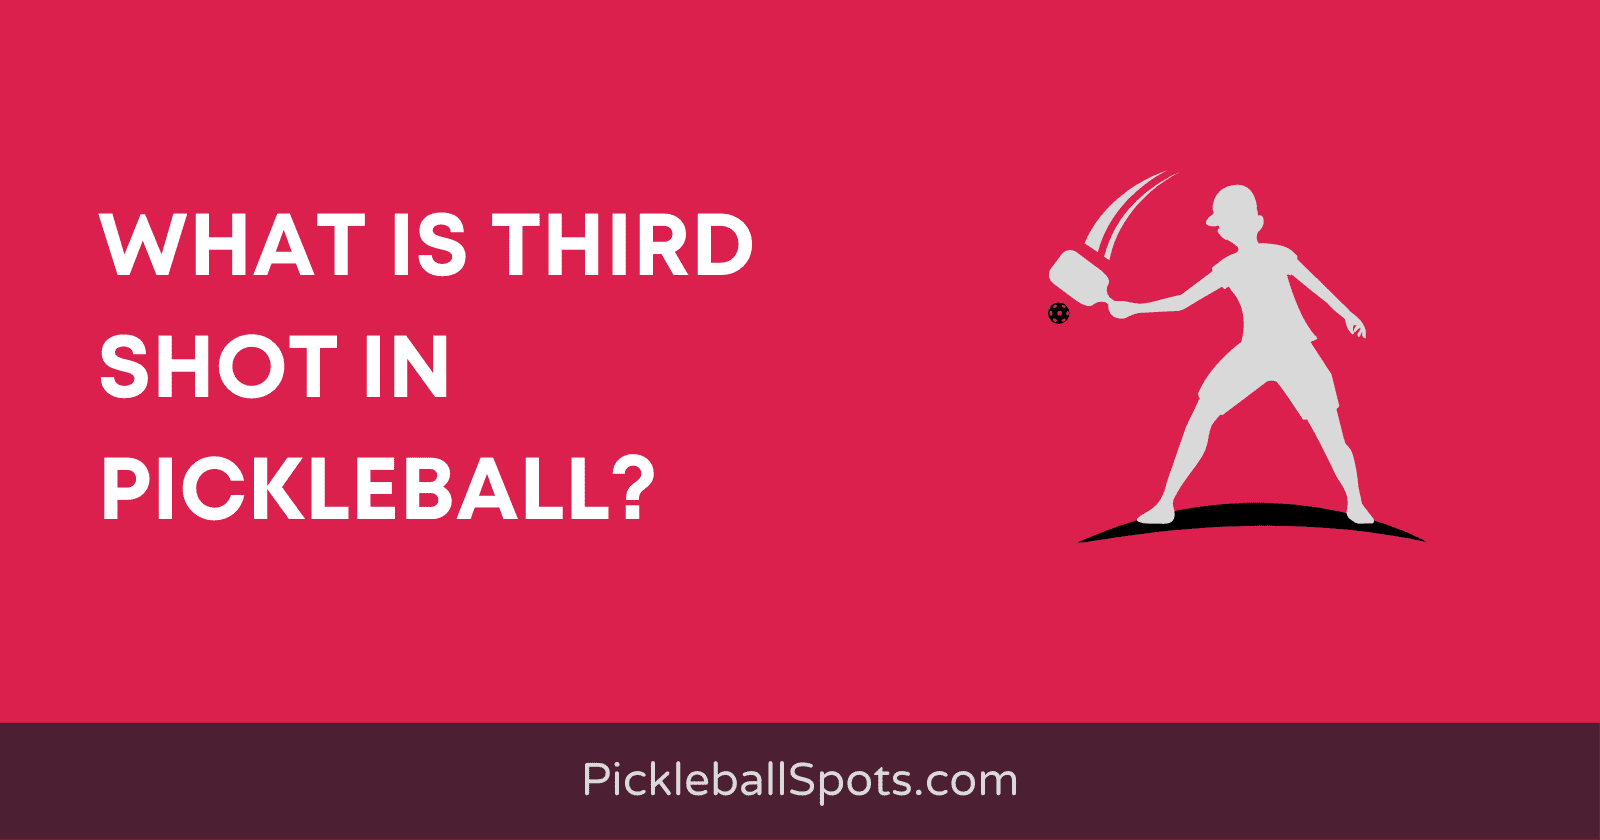 What Is Third Shot In Pickleball